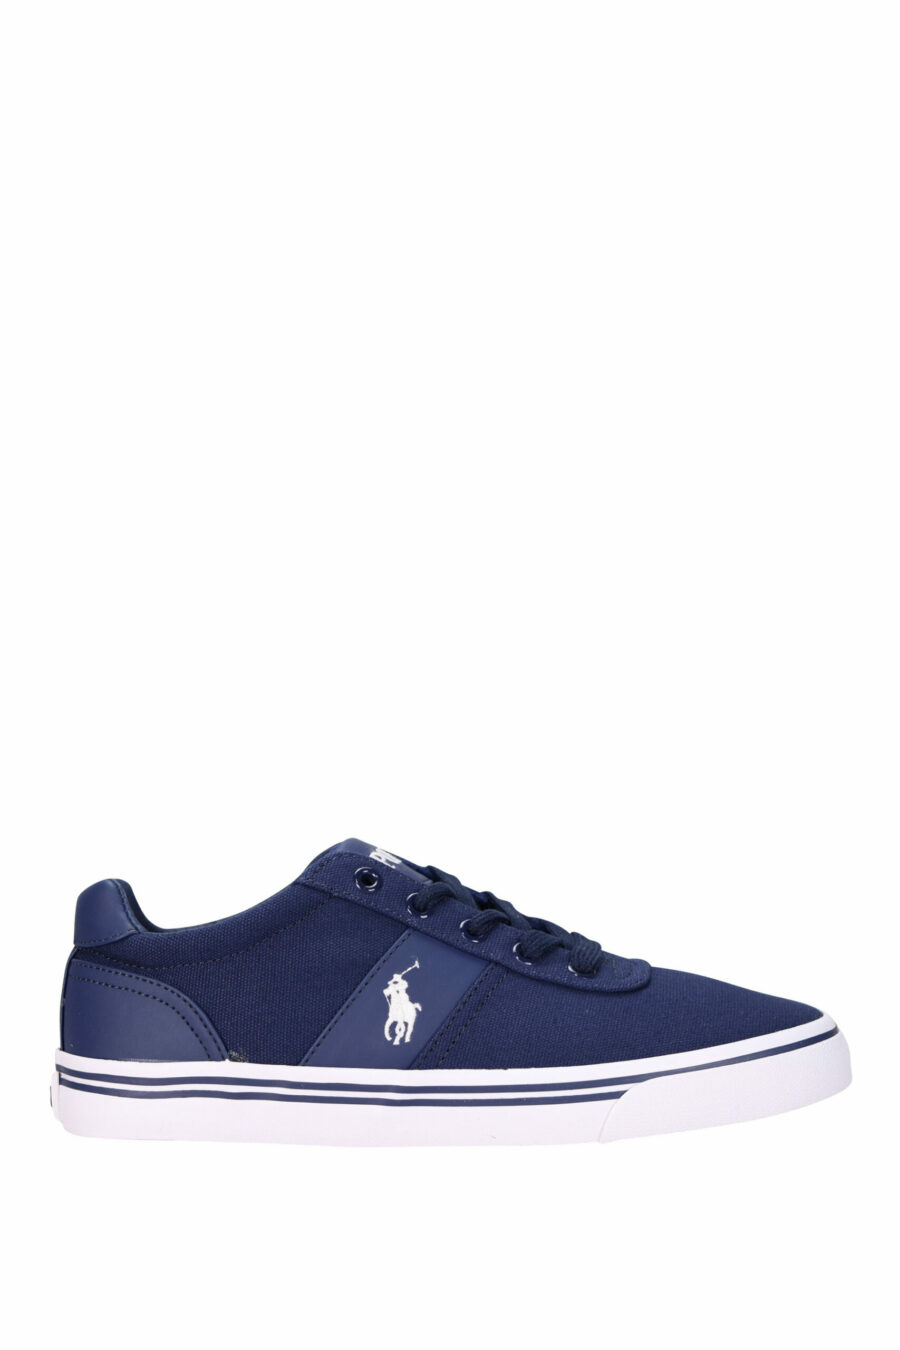 Dark blue trainers with mini-logo "polo" and white sole - 3611588439341 scaled